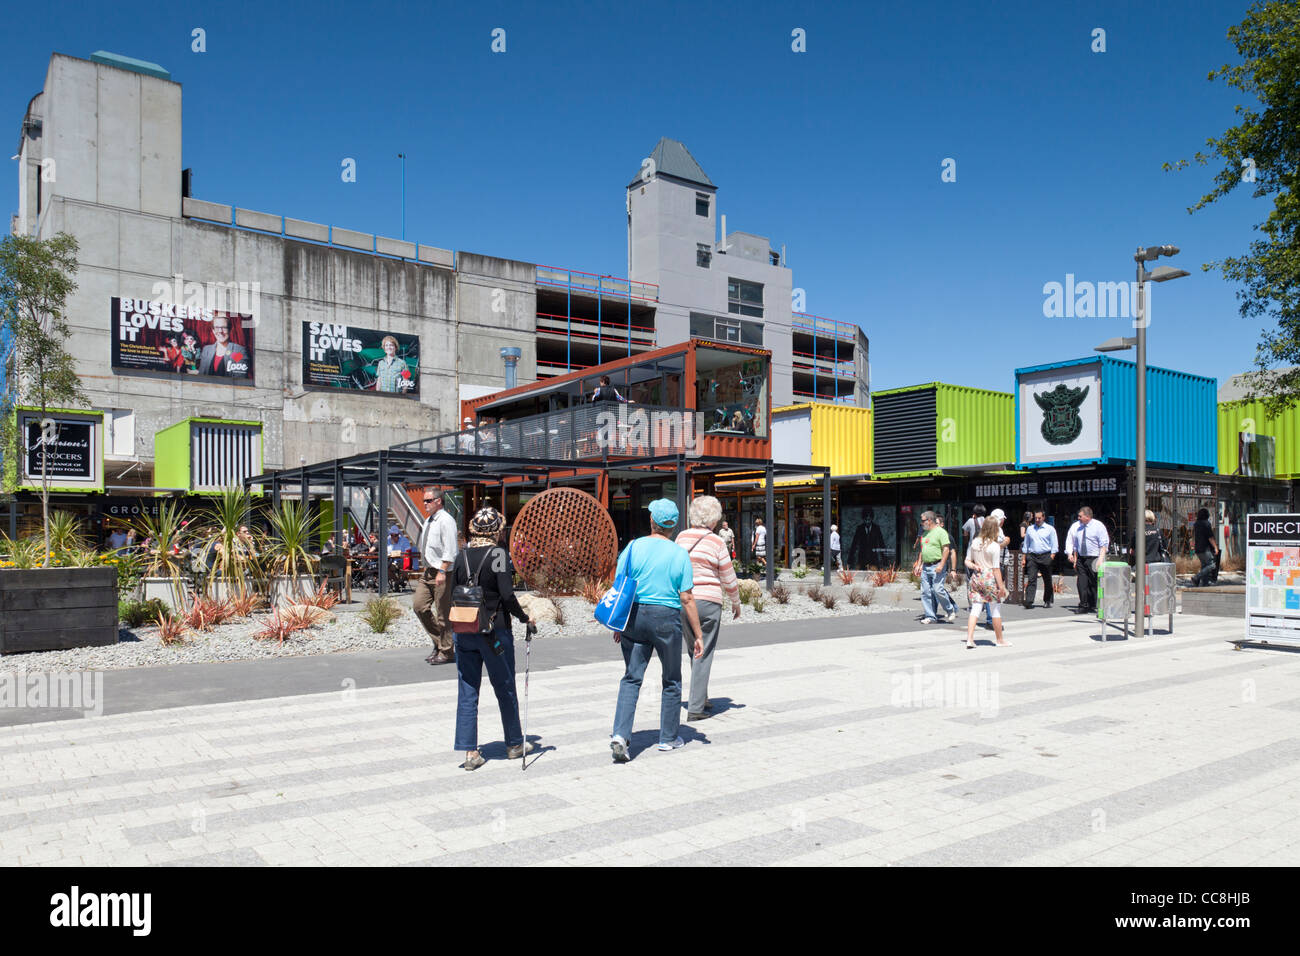 People walking in the shopping mall made from shipping containers in central Christchurch New Zealand. Stock Photo